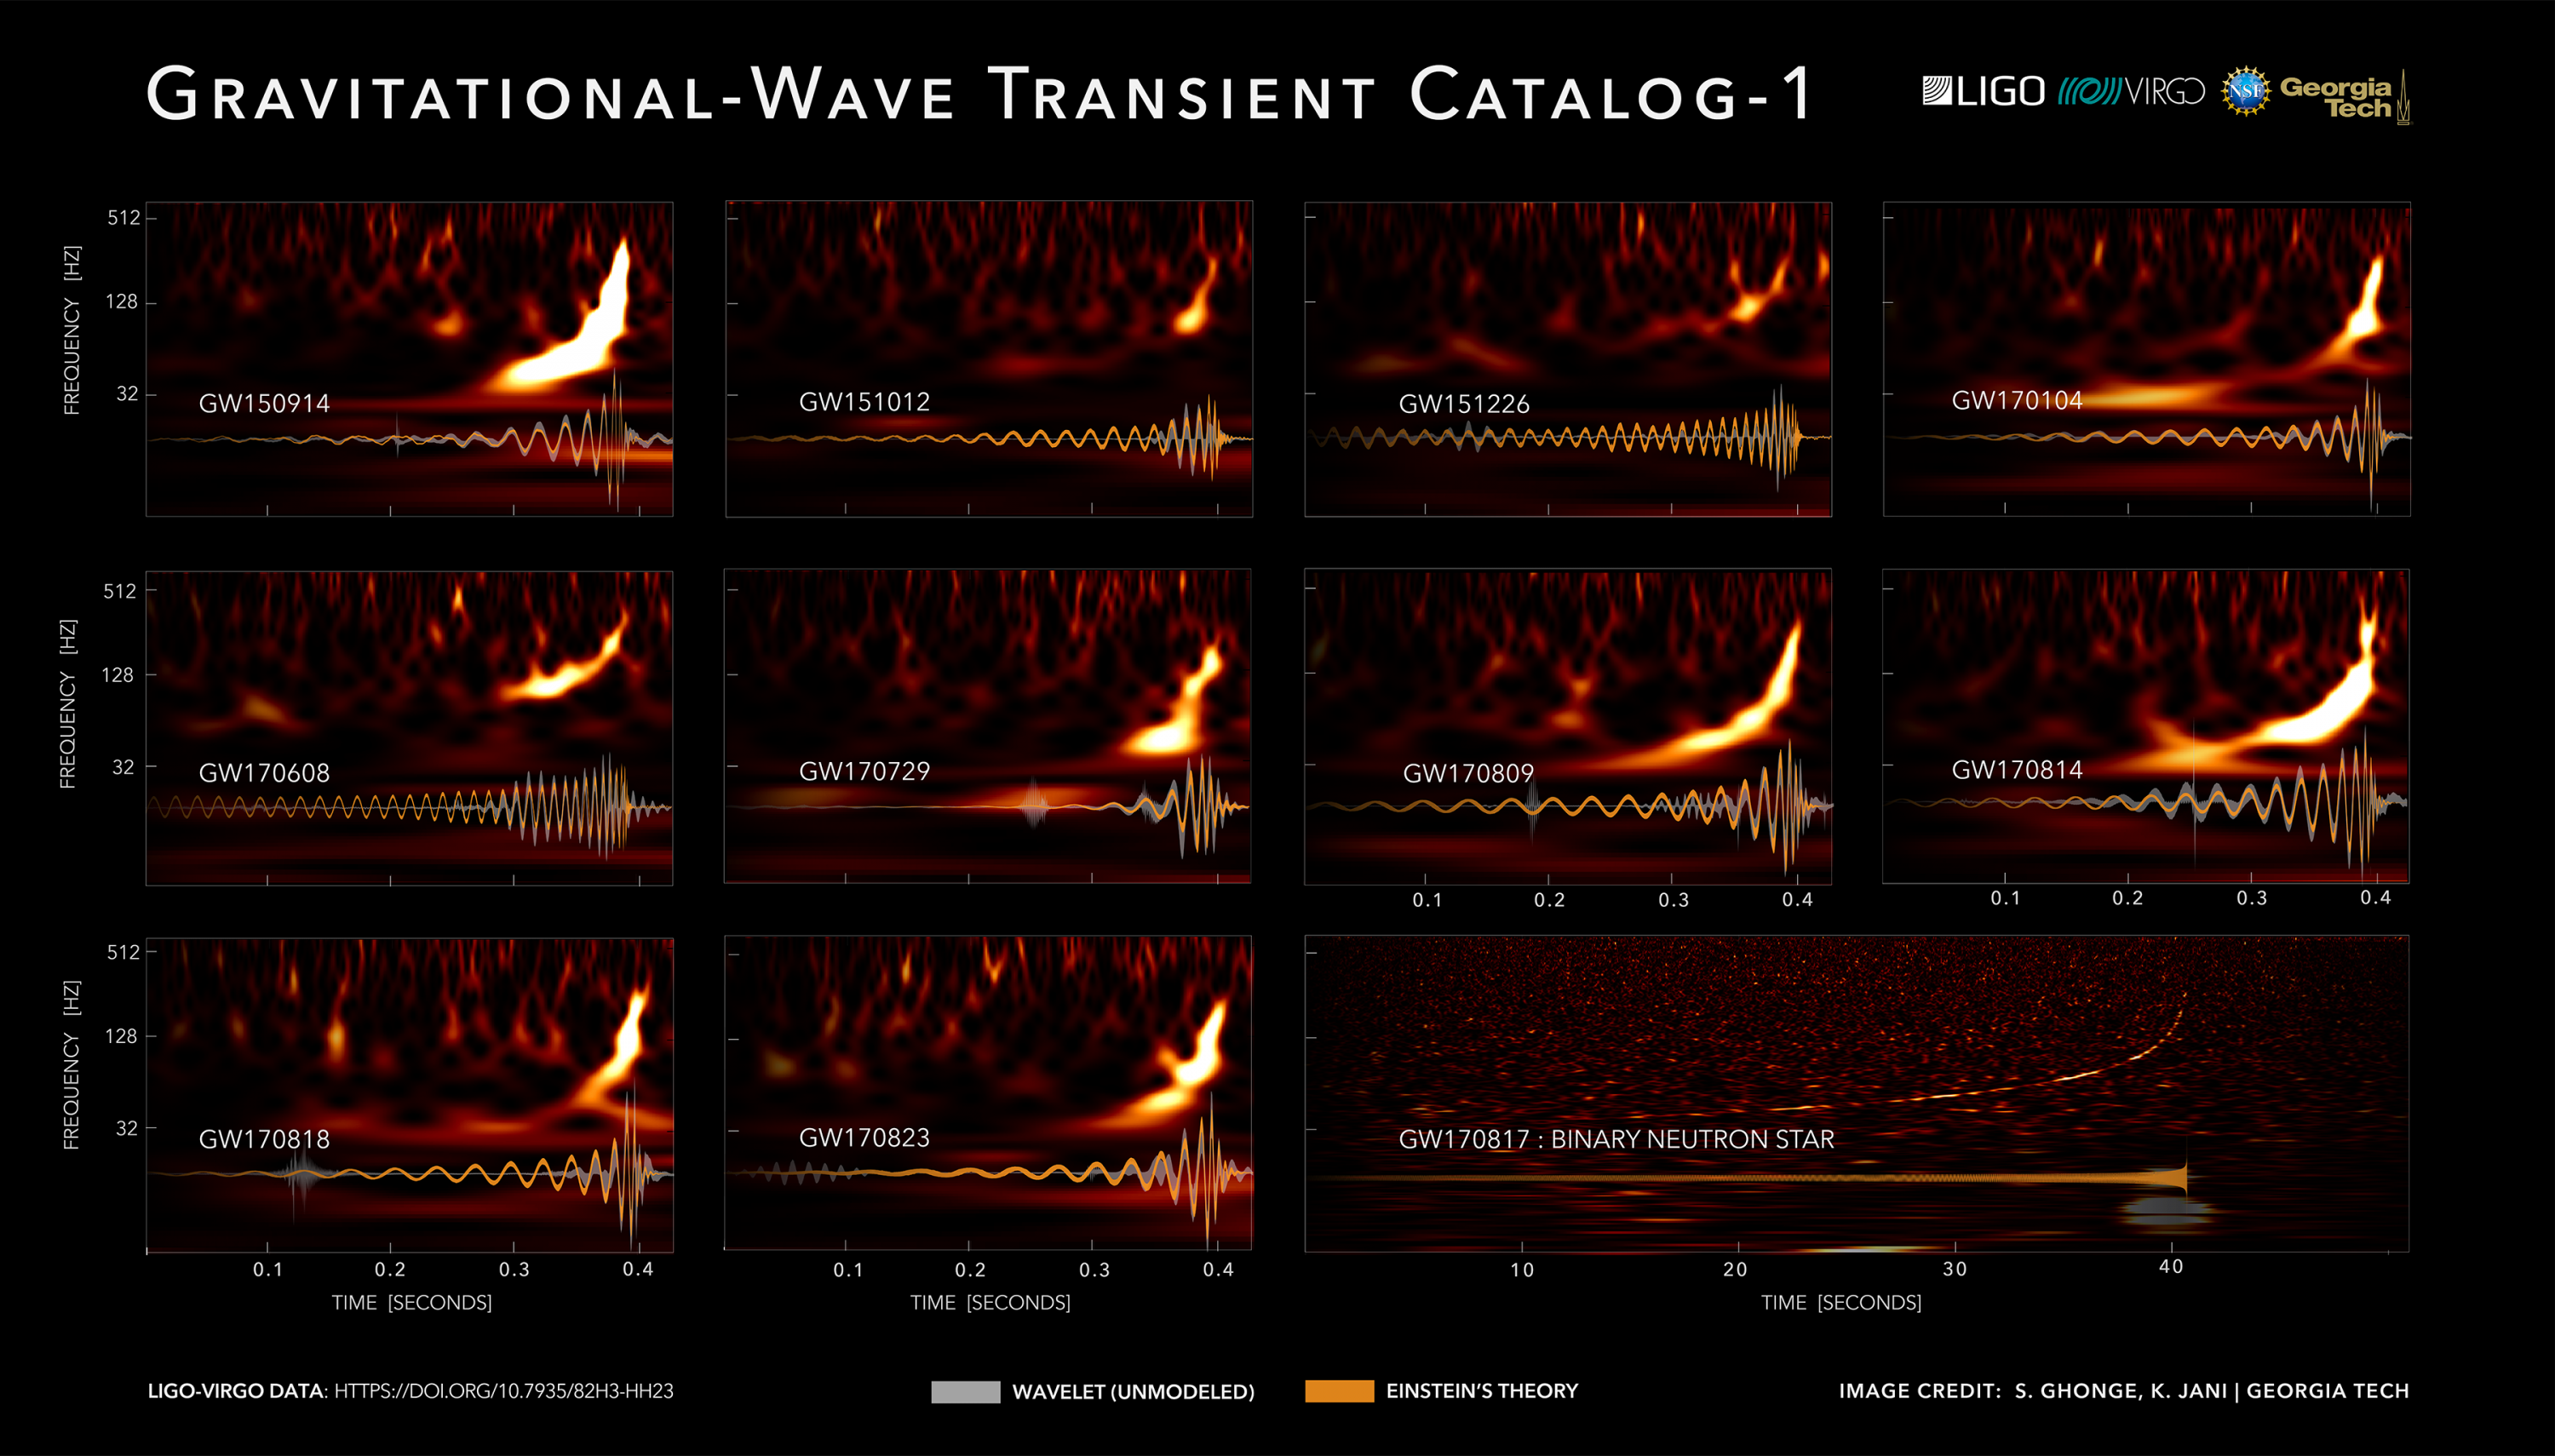 The gravitational wave signals from cosmic events measured by LIGO-Virgo from 2015 to 2017. Of the eleven confirmed transient detections (boxes), ten are mergers of black holes and one is inspiral of neutron stars (bottom right). The heat map shows the energy in time and frequency for each of these cosmic events. The gravitational waves (yellow curves) are the predictions to Einstein’s general theory of relativity for the observed signal. The grey curves below them are a model-independent reconstruction o